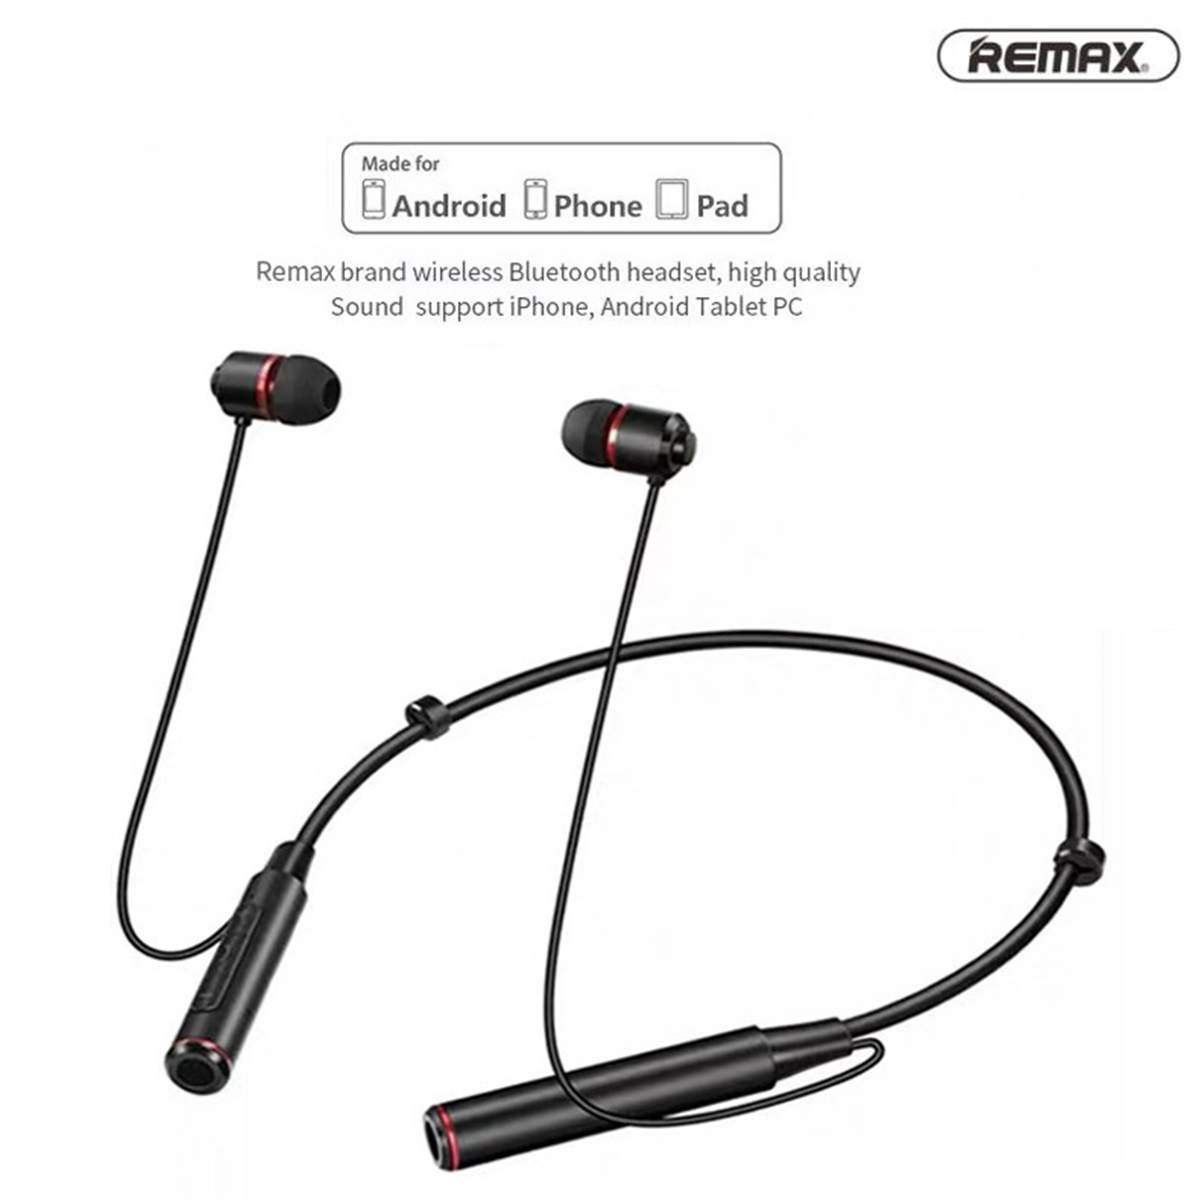 Remax-RB-S6-Bluetooth-Neckband-Price-in-BD.jpeg